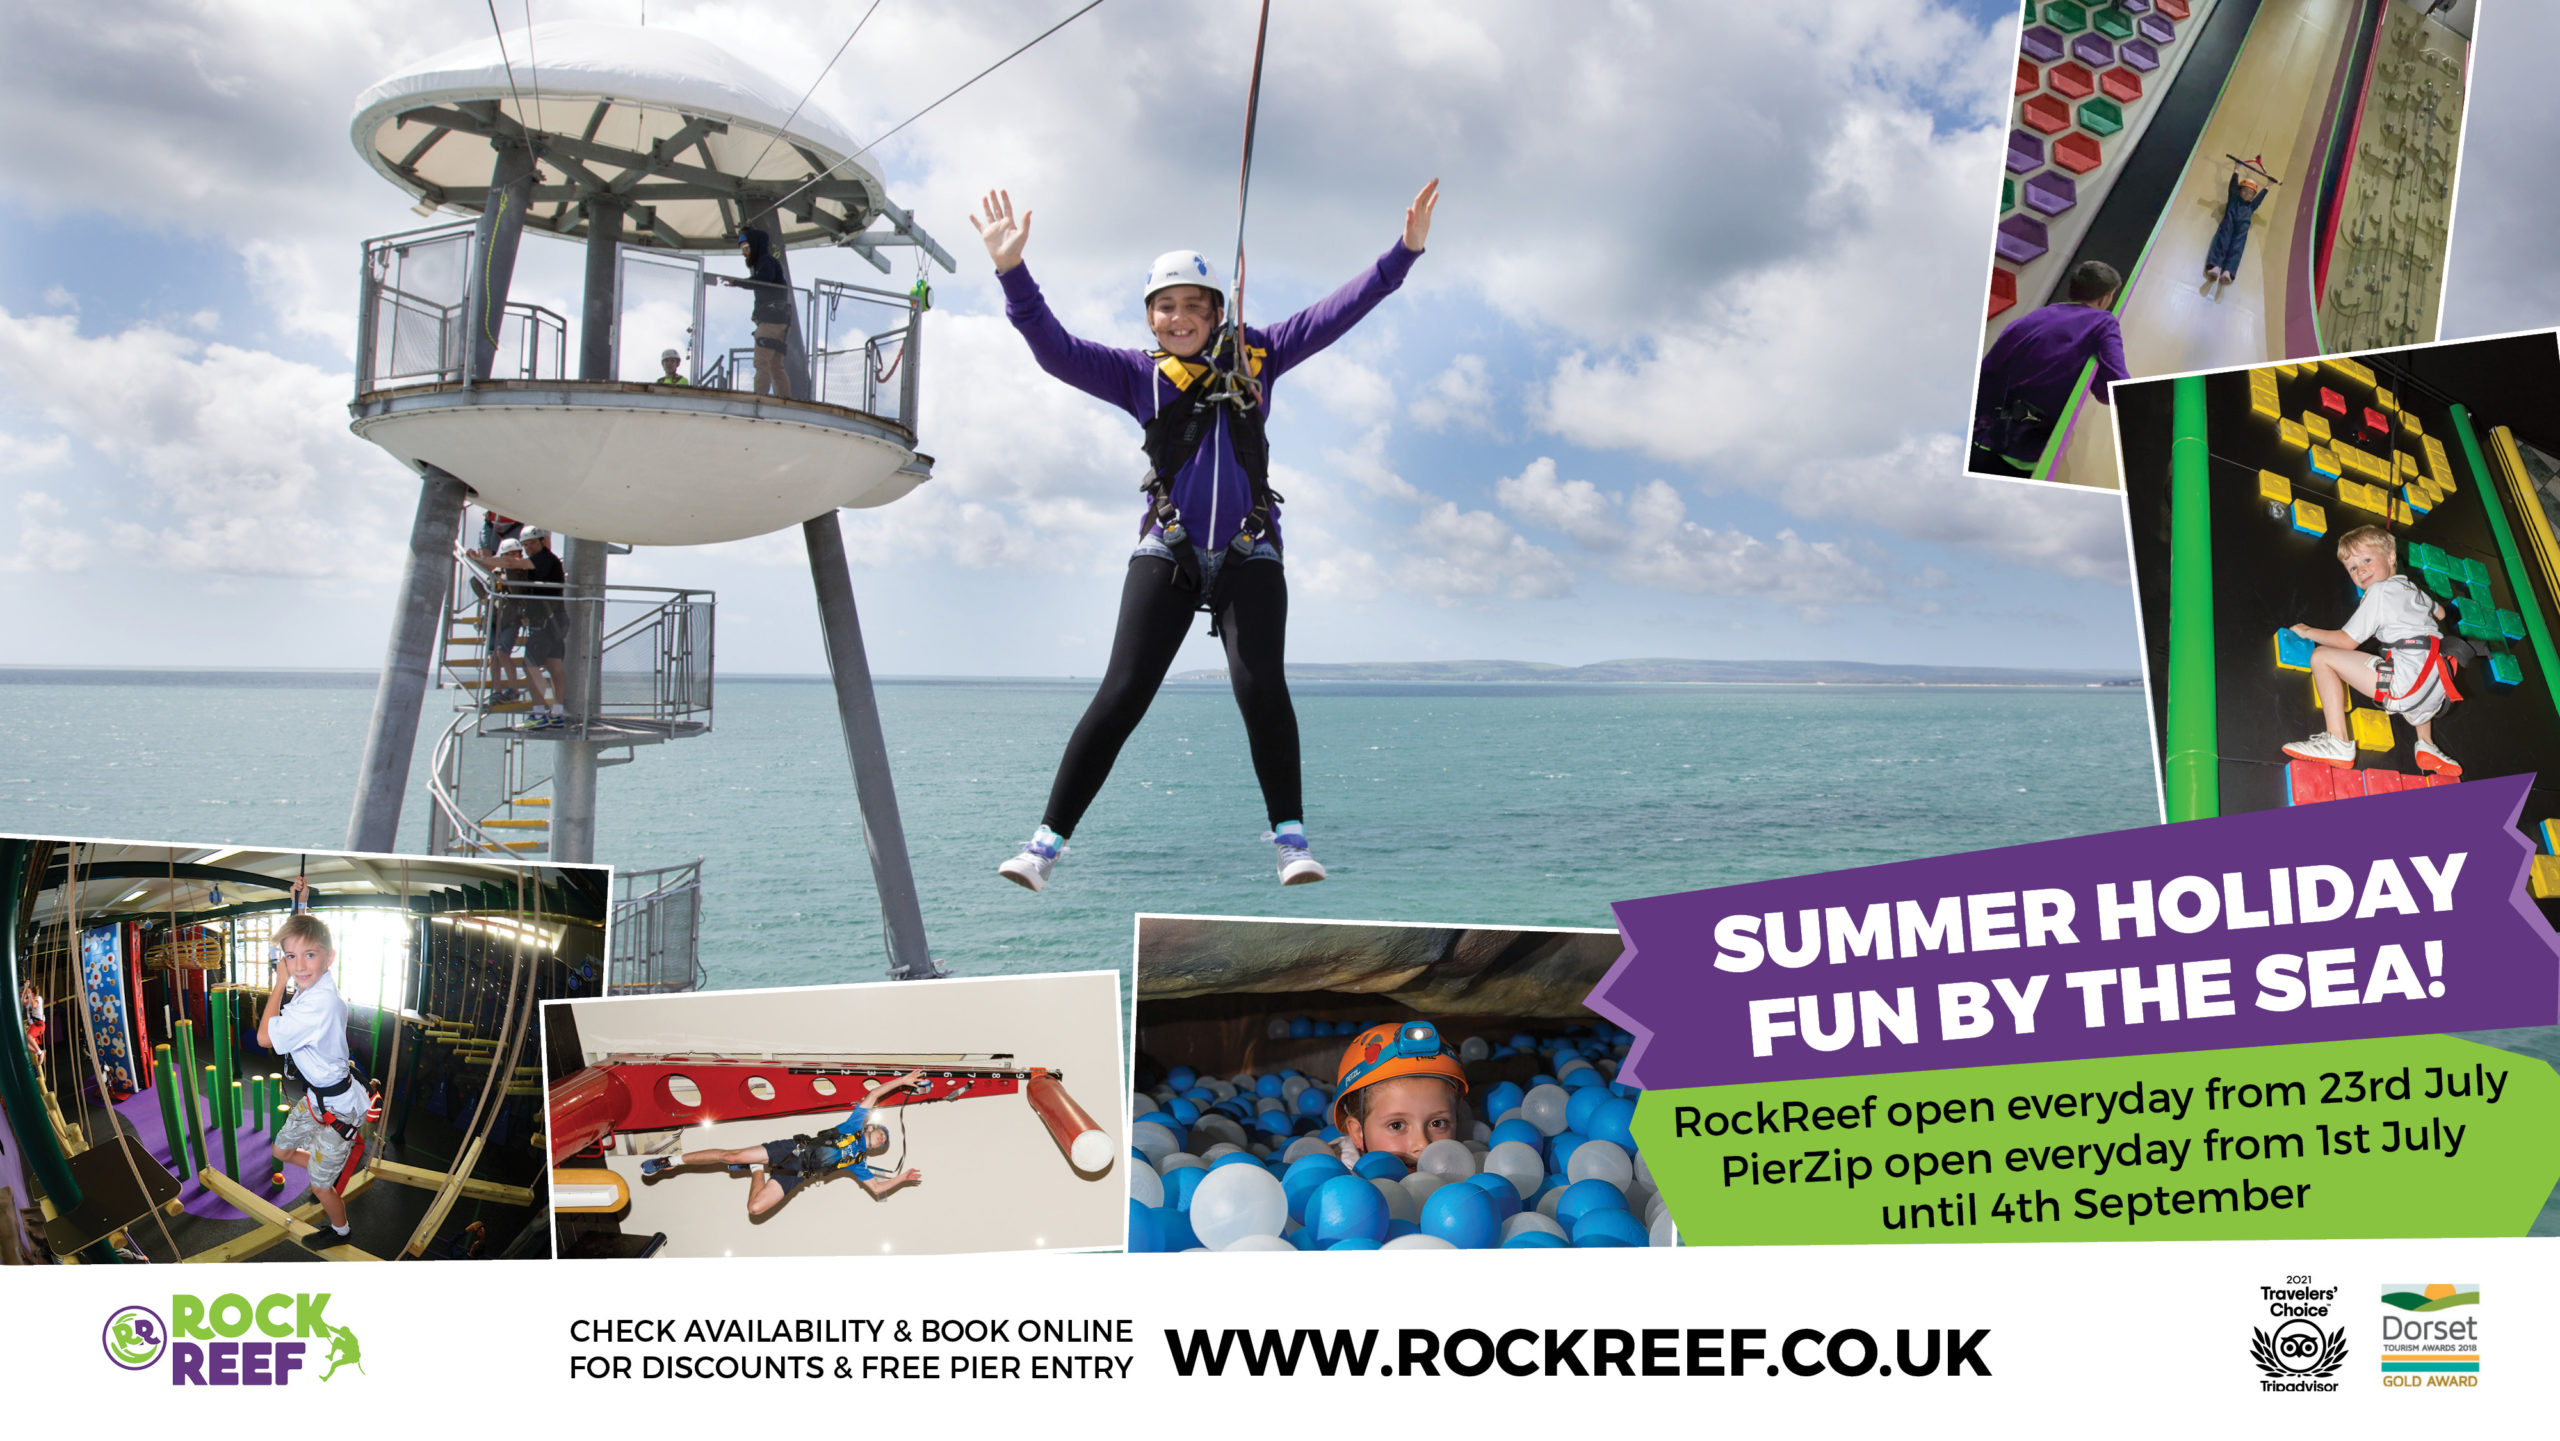 RockReef and PierZip on Bournemouth Pier will be open 7 days a week for summer holiday fun!